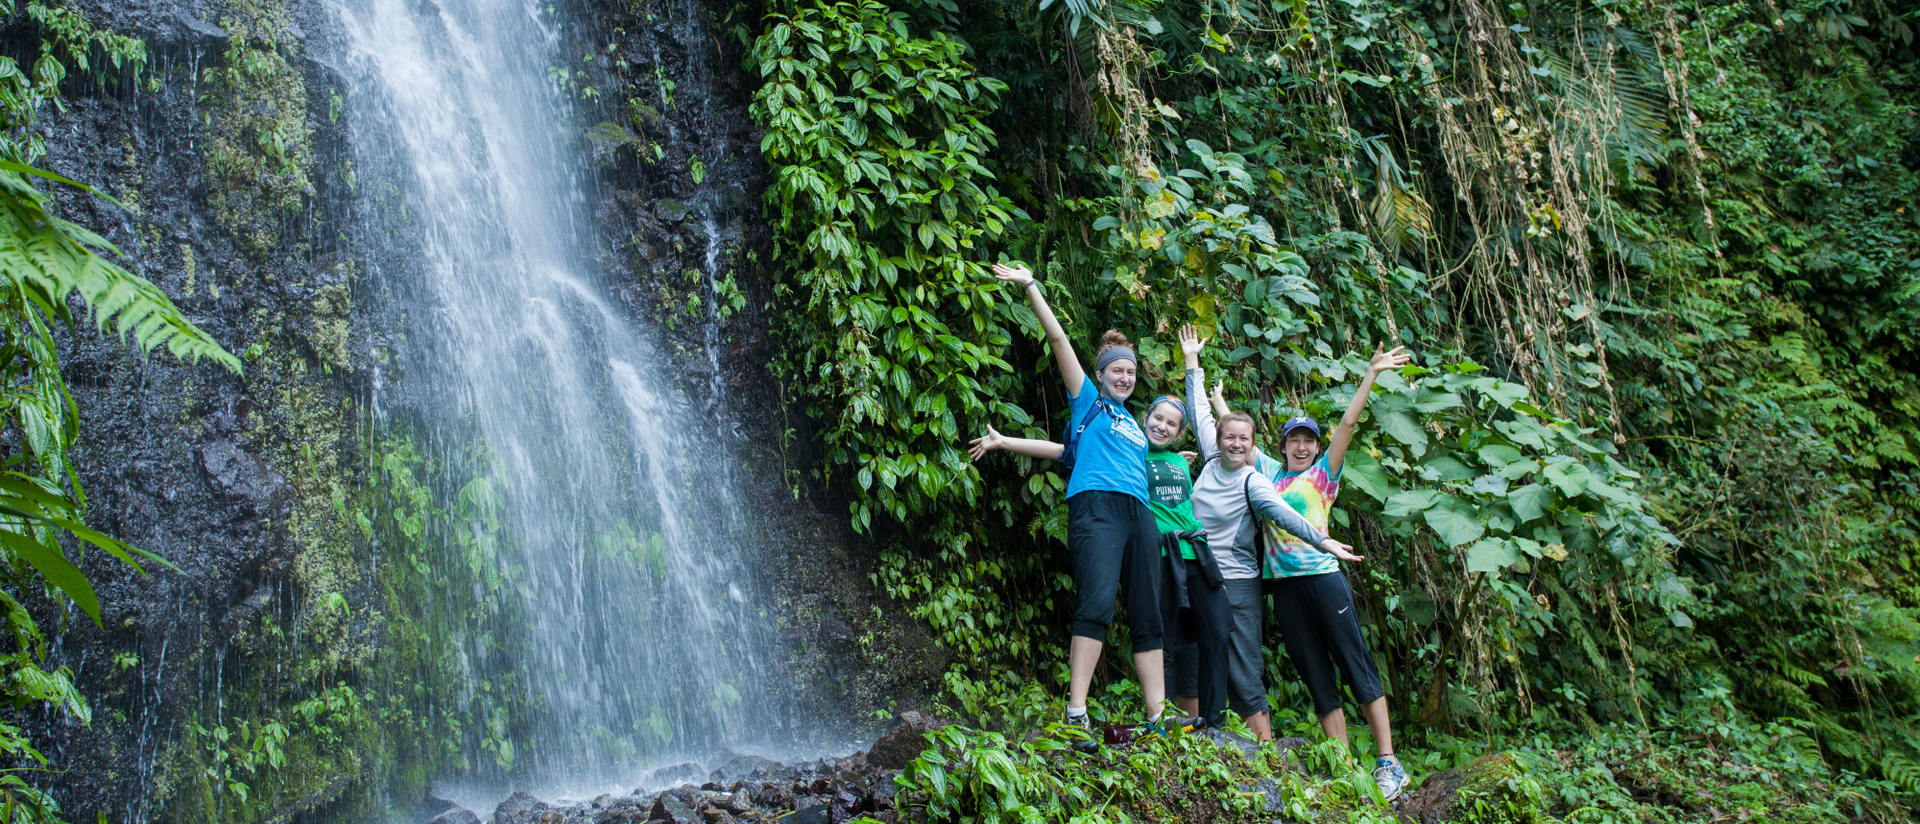 Students in jungle by a waterfall on immersion trip to Guatemala.